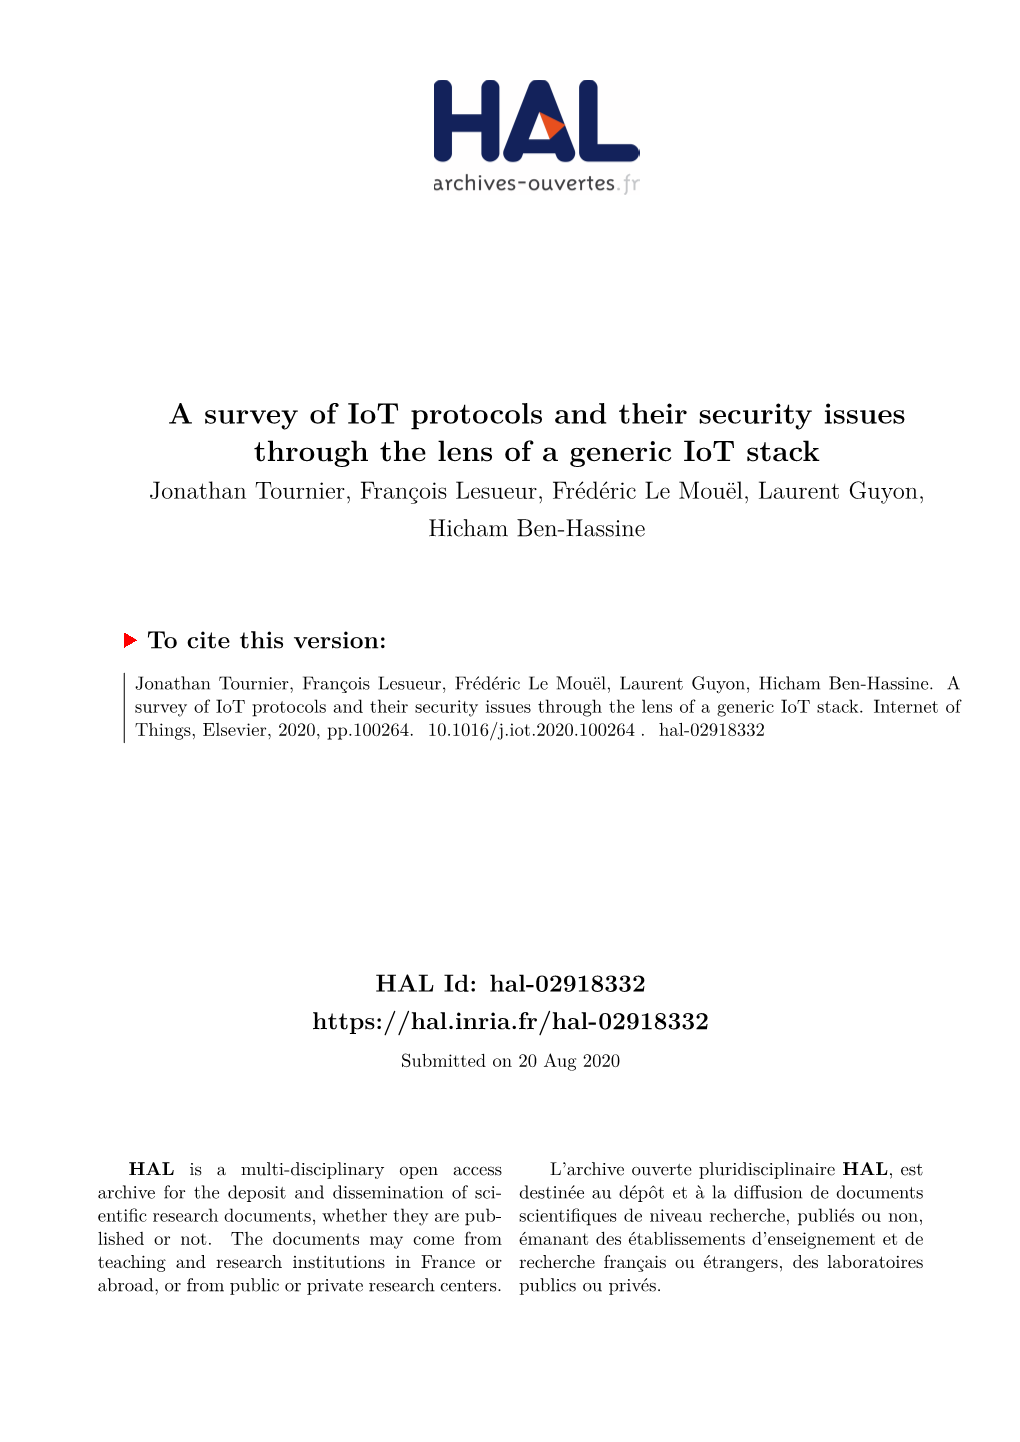 A Survey of Iot Protocols and Their Security Issues Through the Lens of A